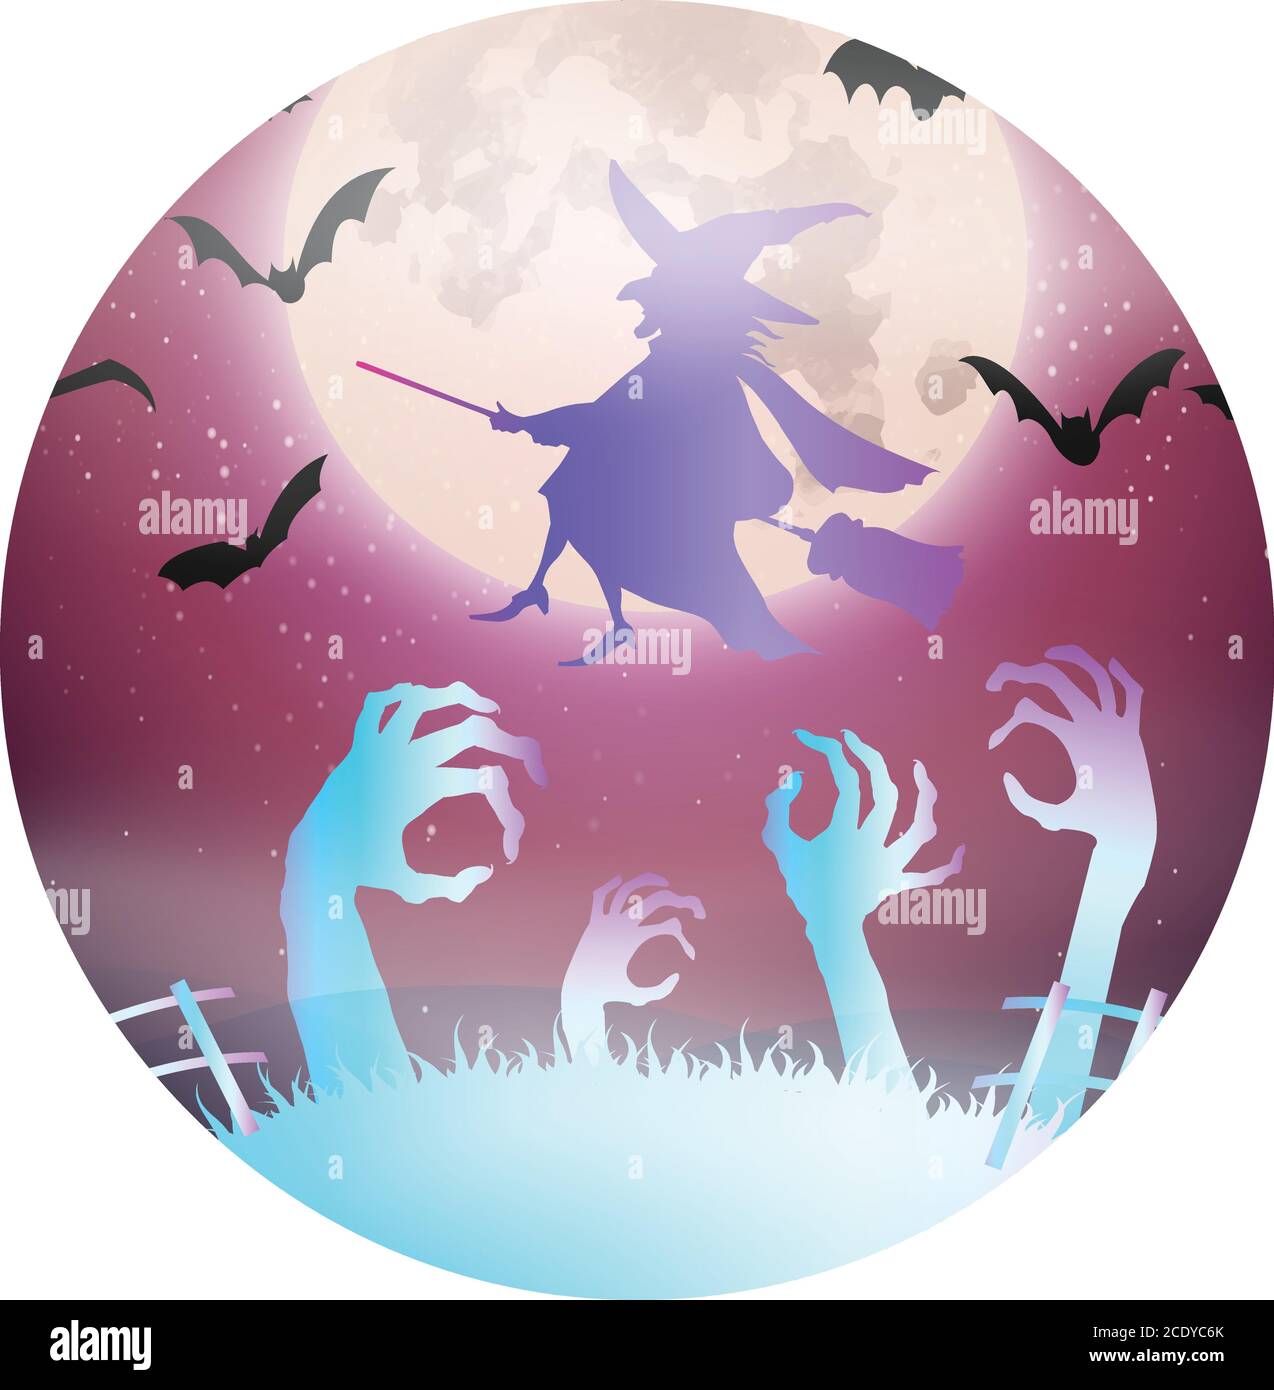 Zombies everywhere! Get into the spirit of halloween with this zombie themed vector. Stock Vector